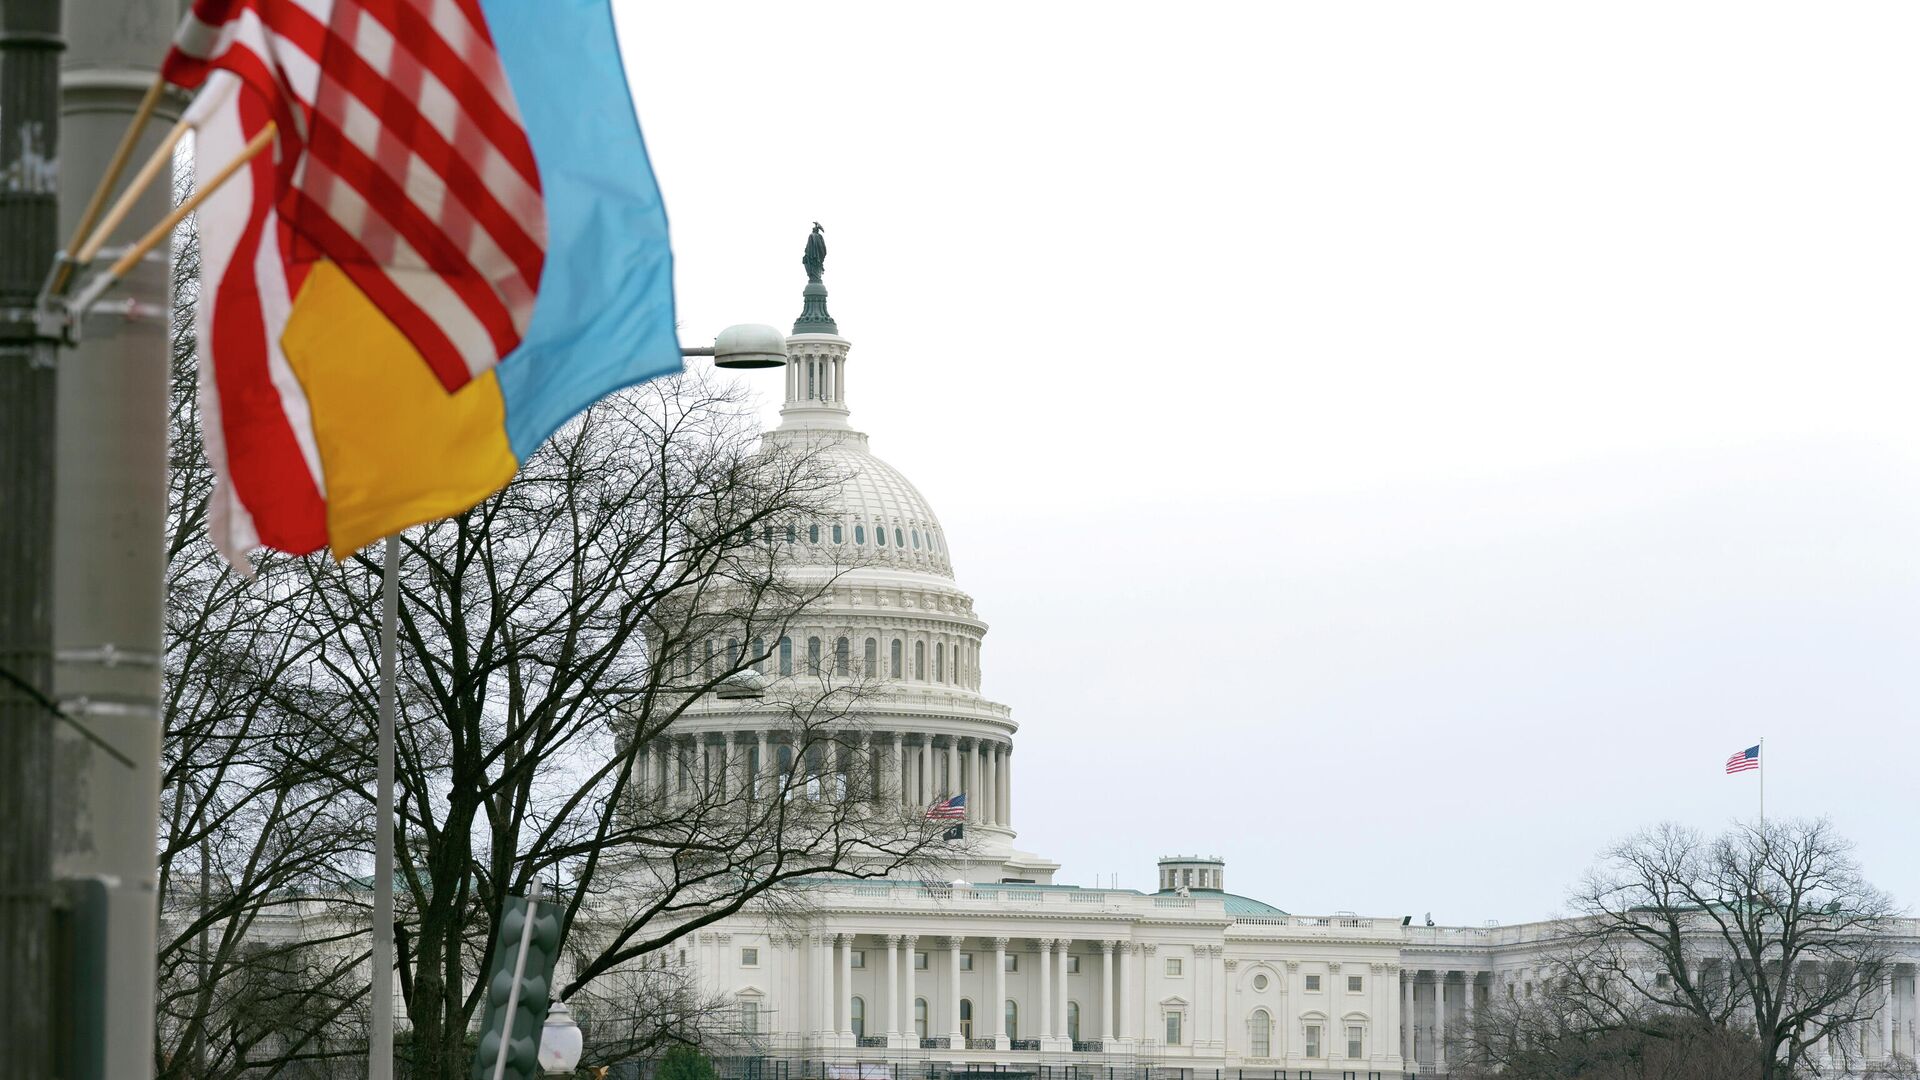 The U.S. Capitol is seen behind the U.S. flag, Ukrainian flag and the flag of Washington, D.C., in Washington, Tuesday, March, 1, 2022. President Joe Biden will deliver his first State of the Union address at a precipitous moment for the nation. Biden is aiming to navigate the country out of a pandemic, reboot his stalled domestic agenda and confront Russia’s aggression. - Sputnik International, 1920, 01.03.2022